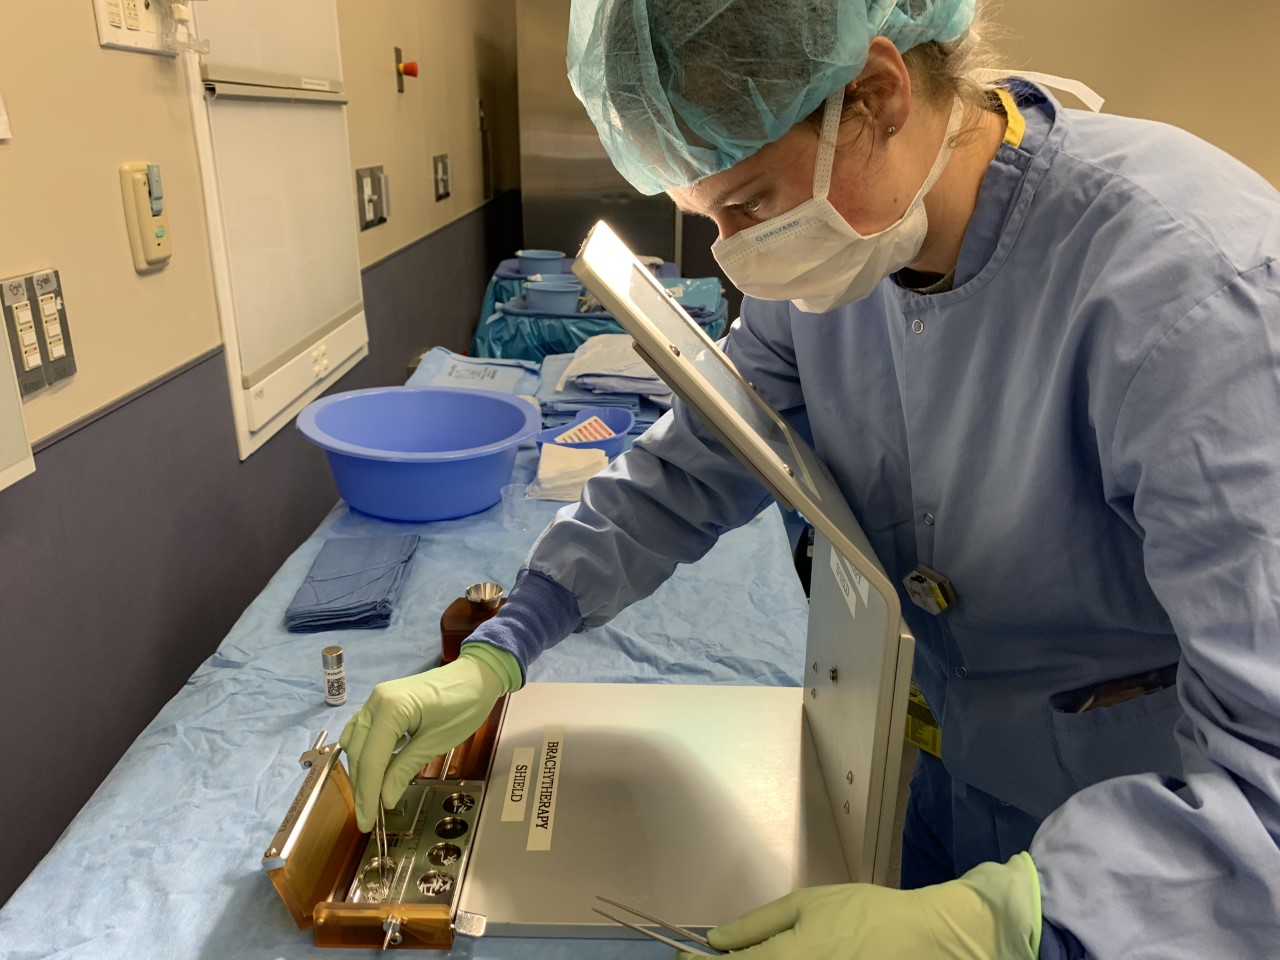 Cielle hands-on training in brachytherapy